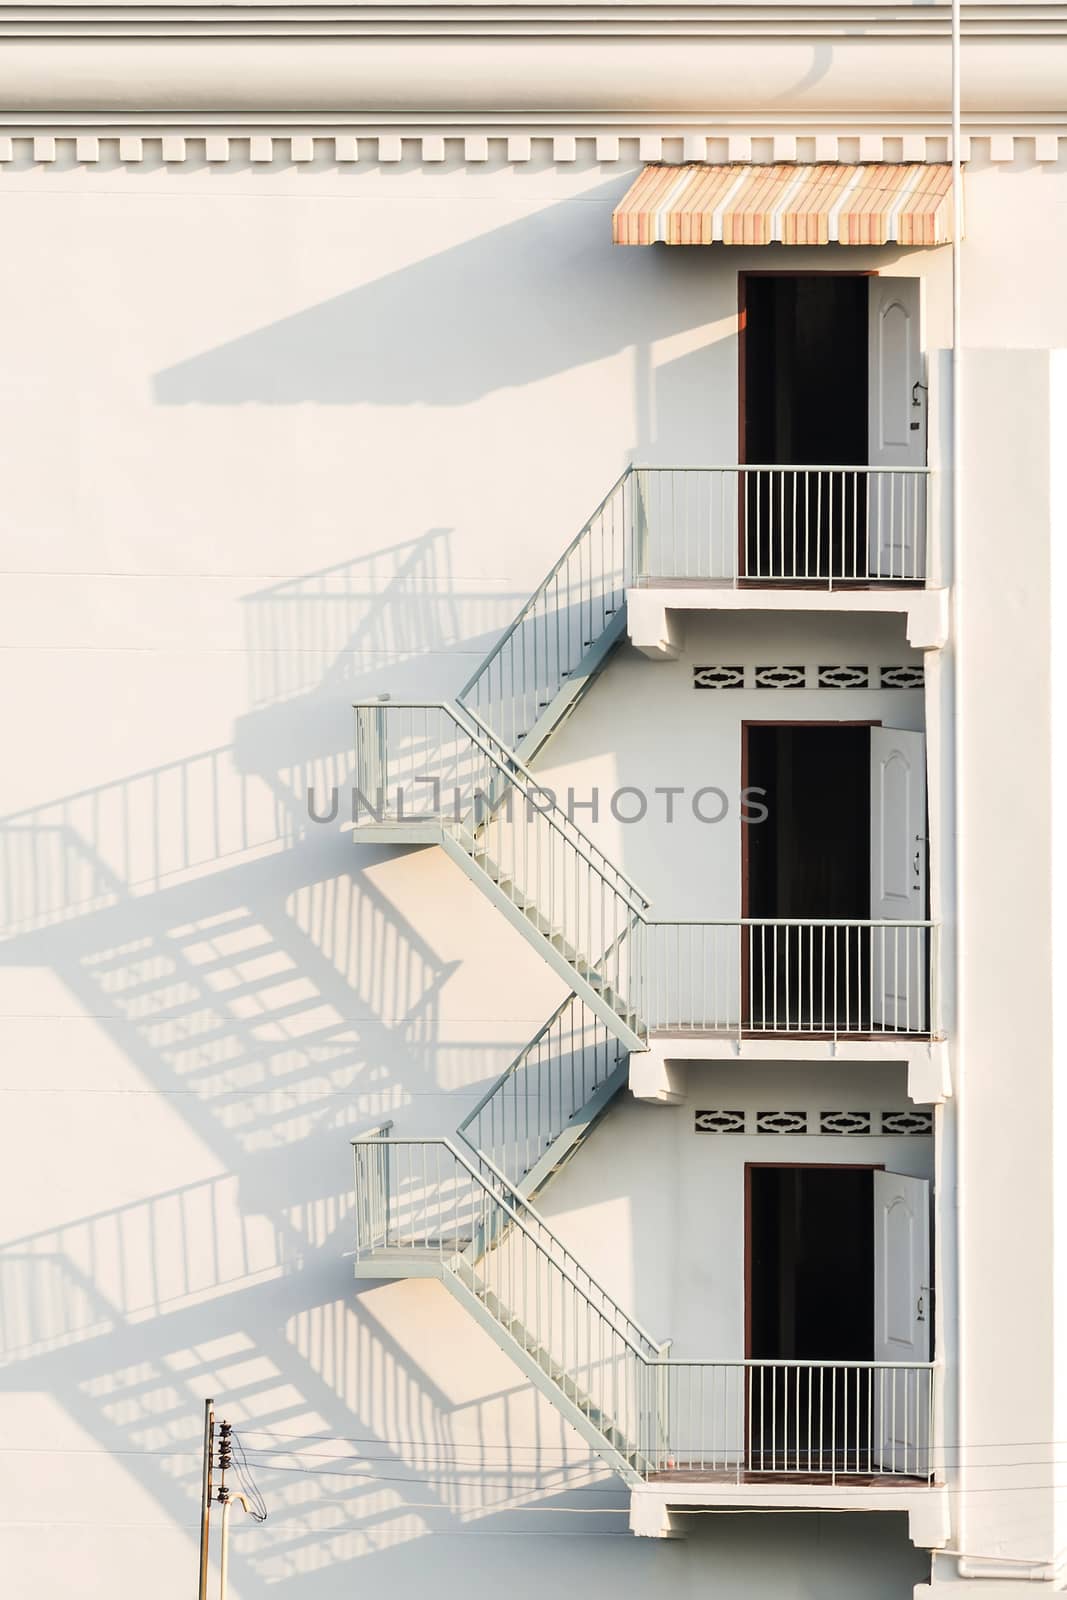 fire escape with afternoon shadows on exterior white wall.